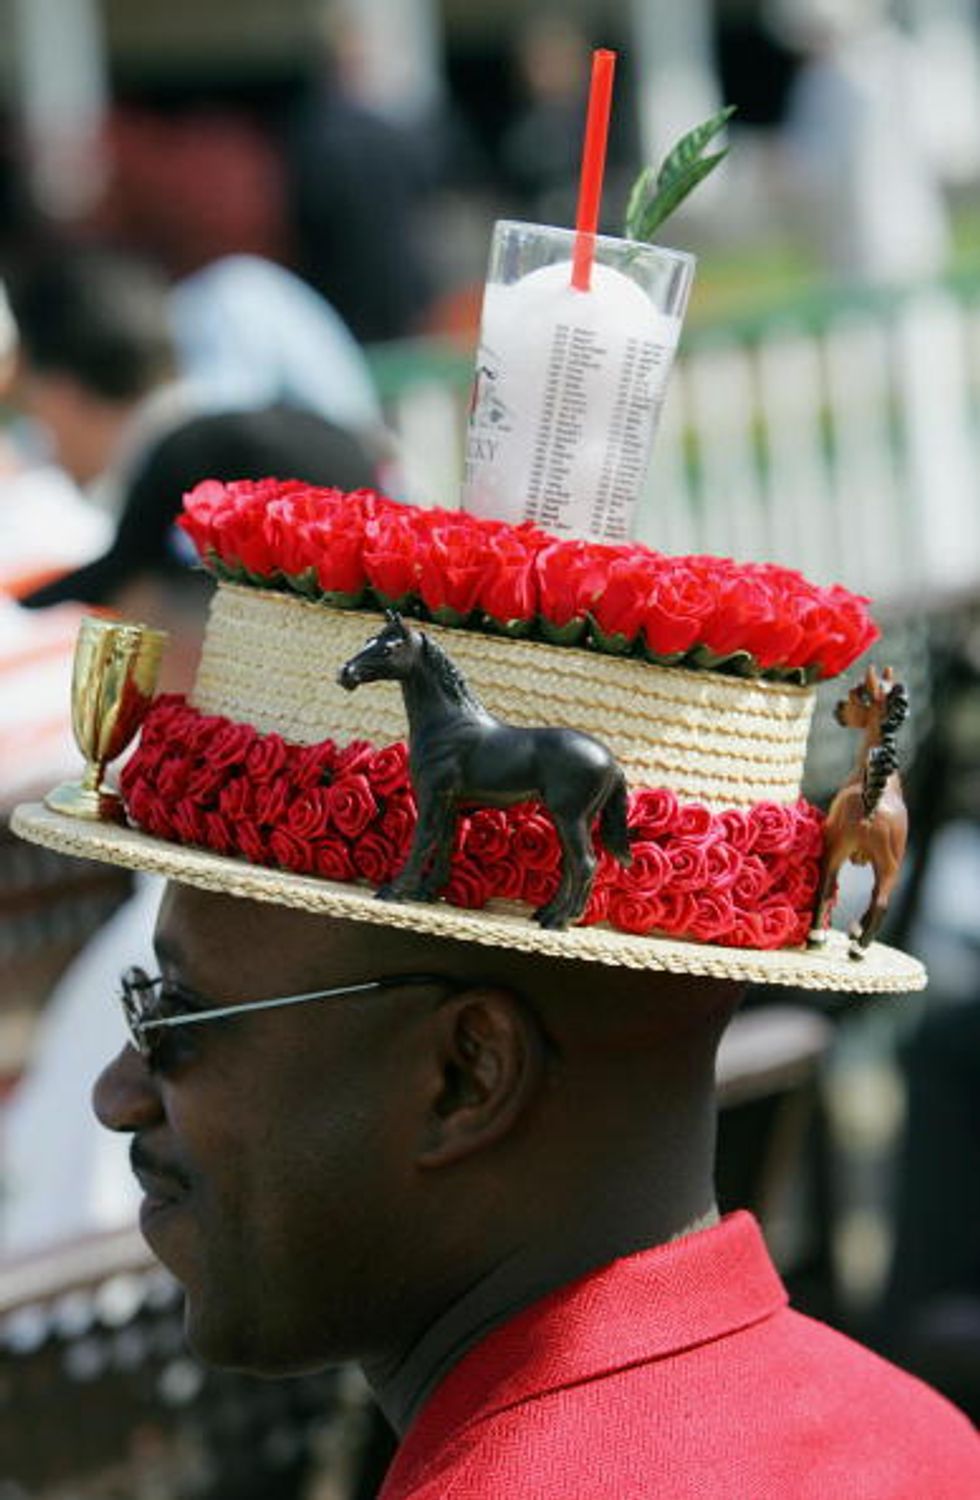 The 25 Most Outrageous Kentucky Derby Hats Over the Years 22 Words